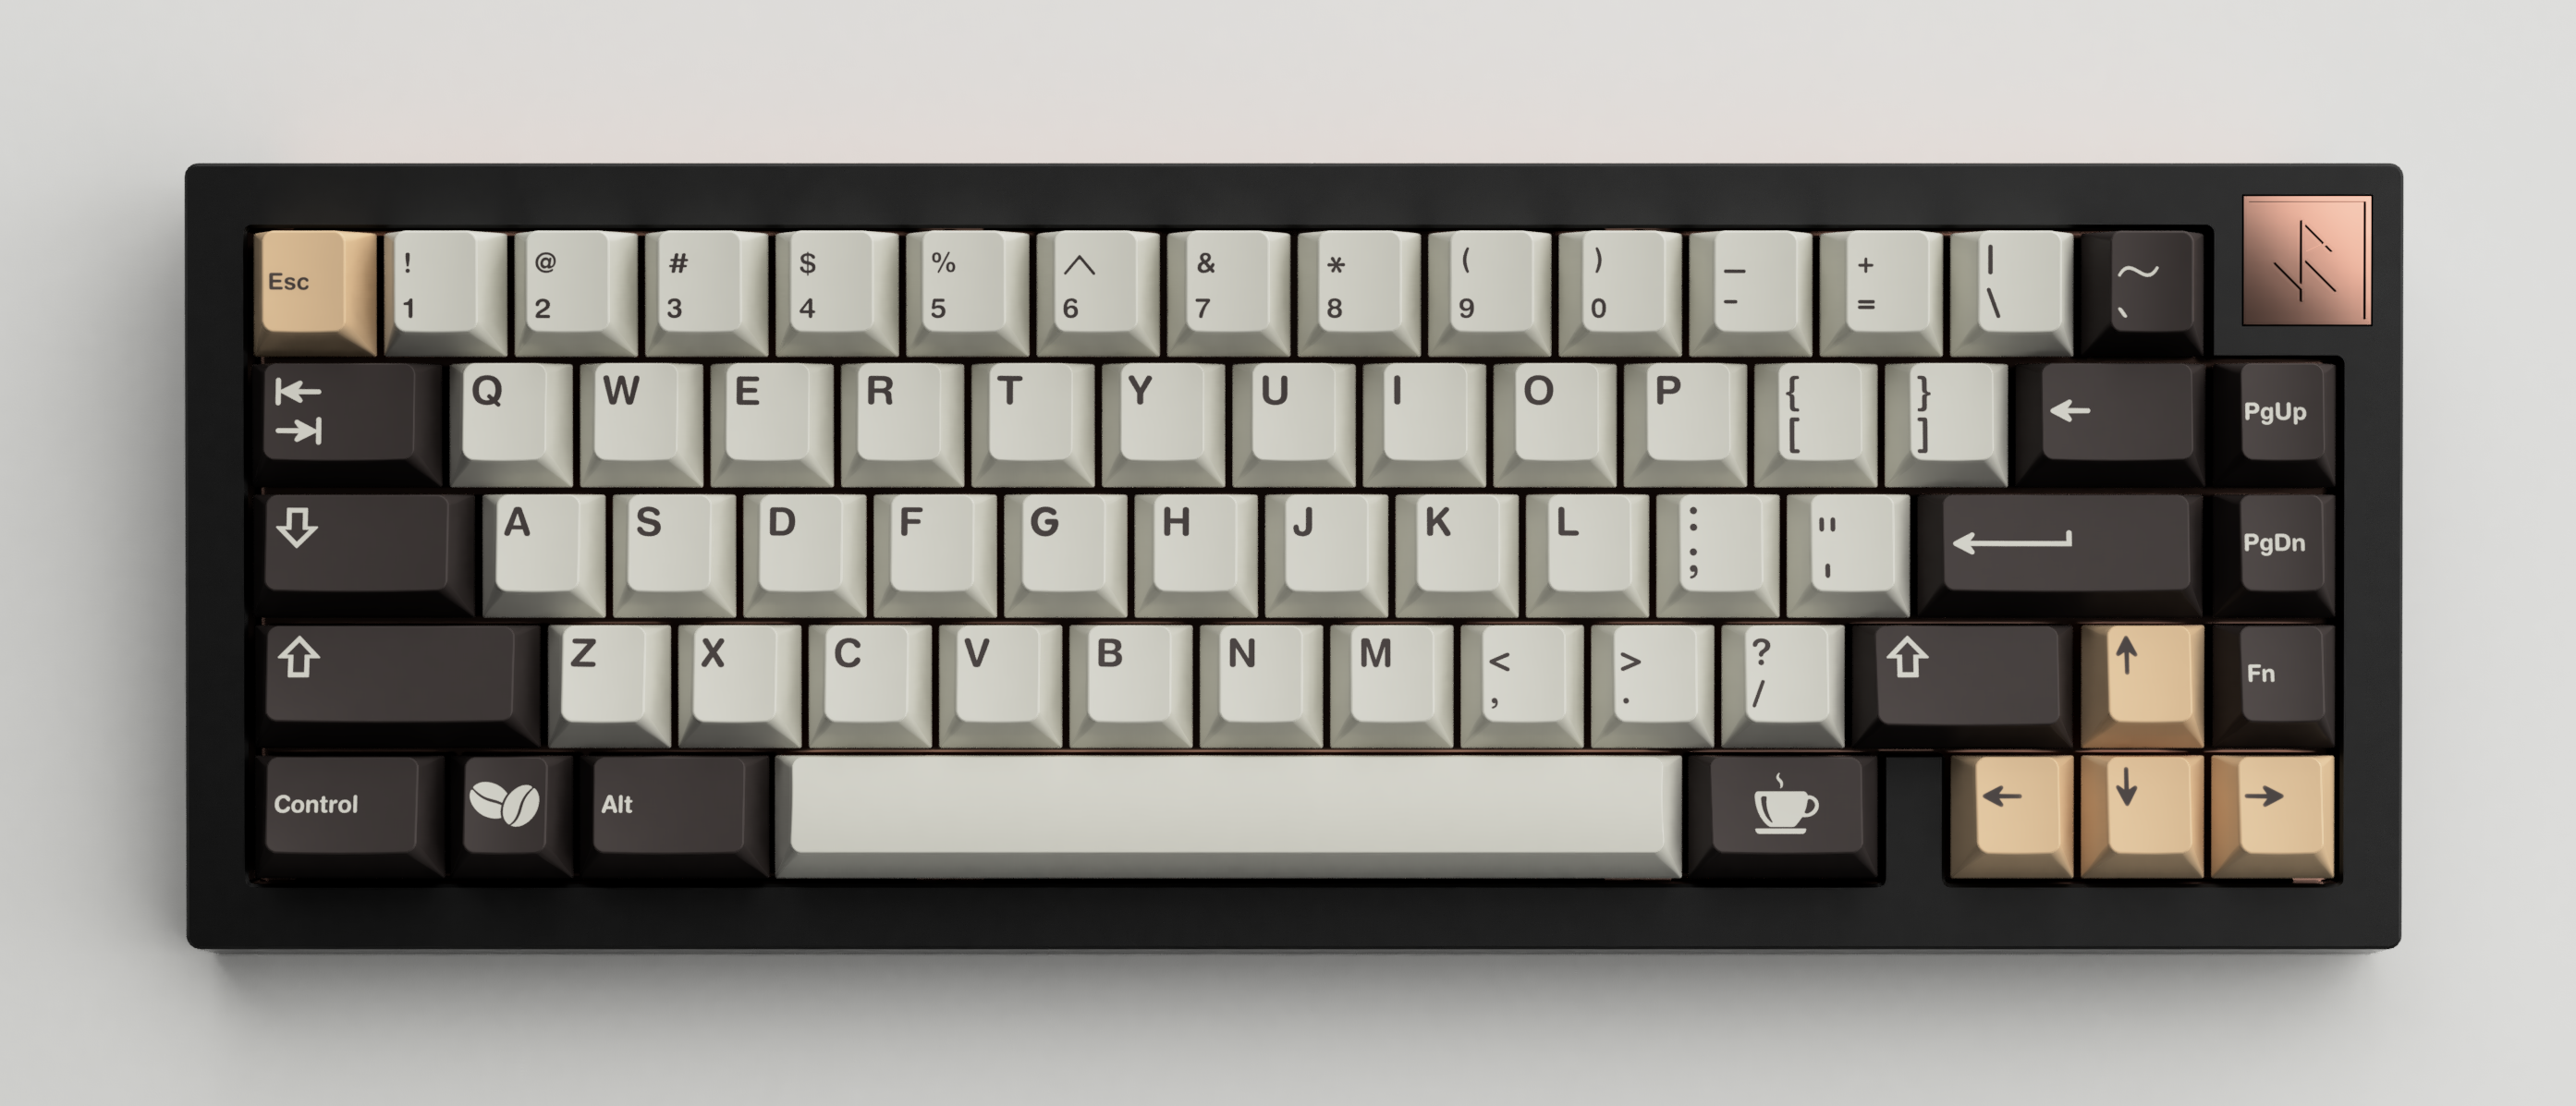 rectangular keyboard with cafe style keycaps and a runic badge